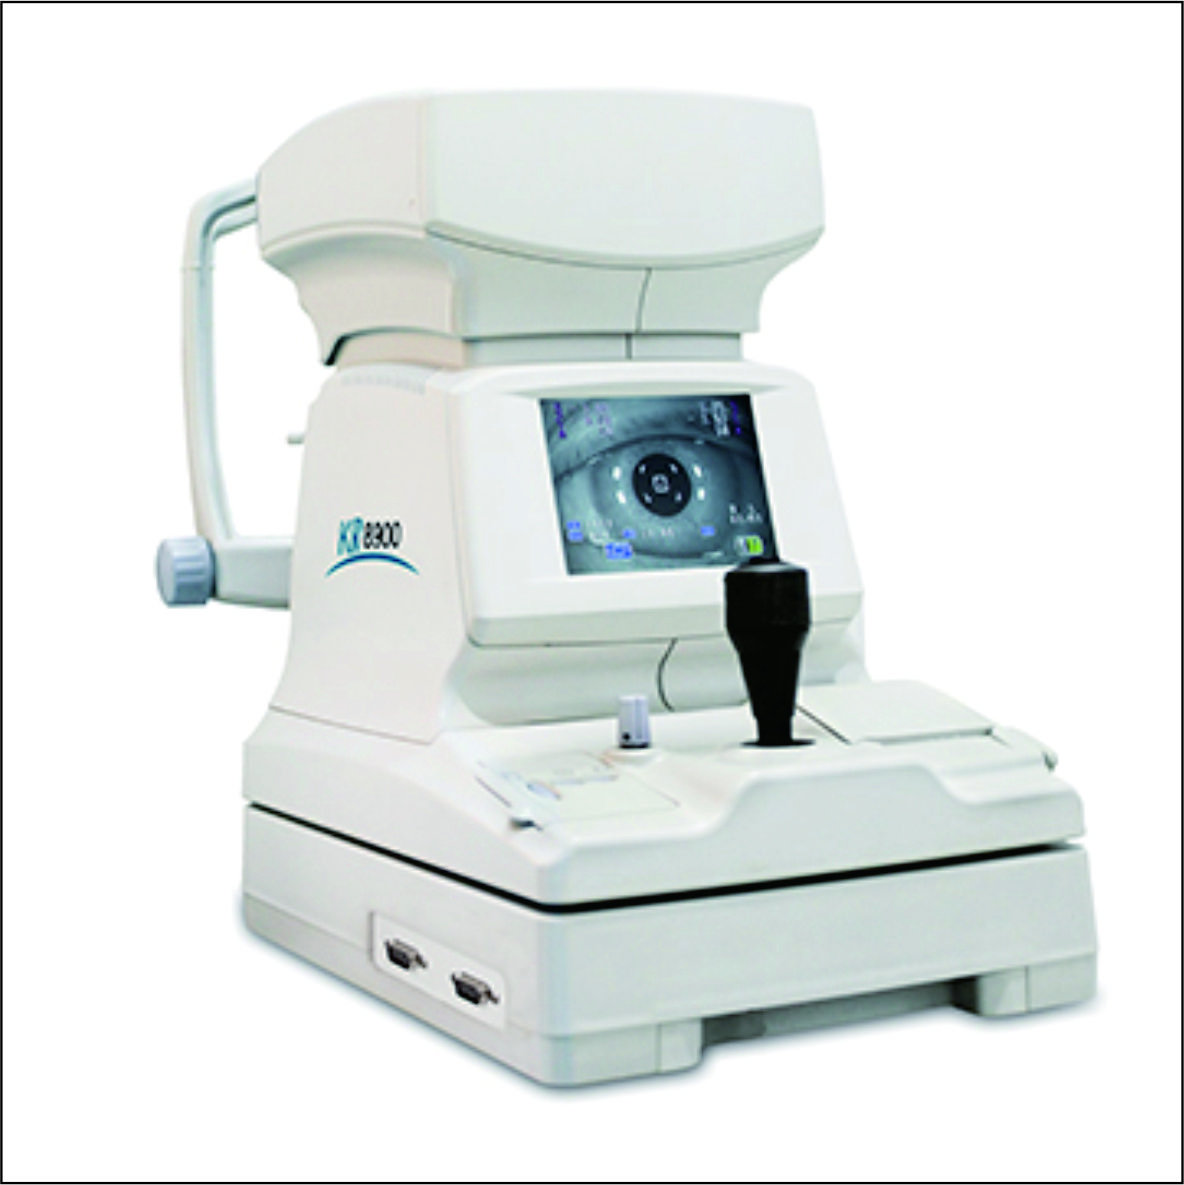 FRK-8900 with keratometer